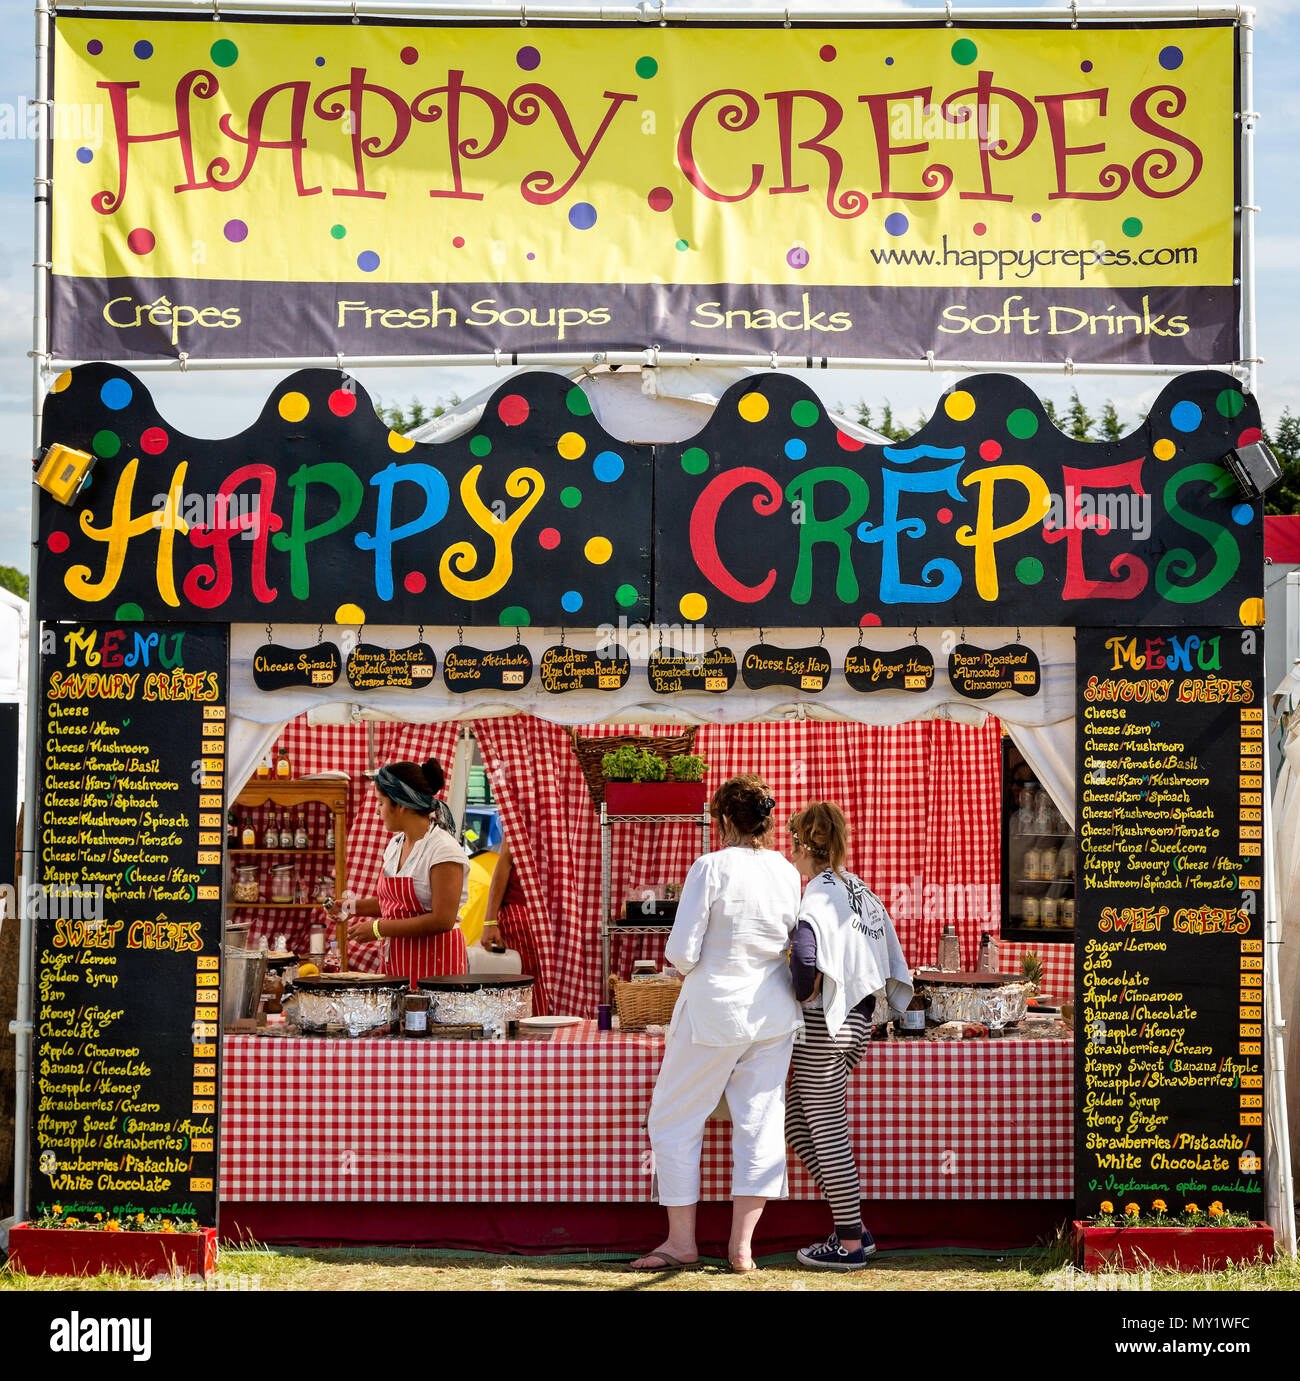 CREPERIE STALL MARKET BRITTANY instant fresh delicious nutritional crepes  prepared on-demand at Quimper Farmers Market Brittany France Stock Photo -  Alamy